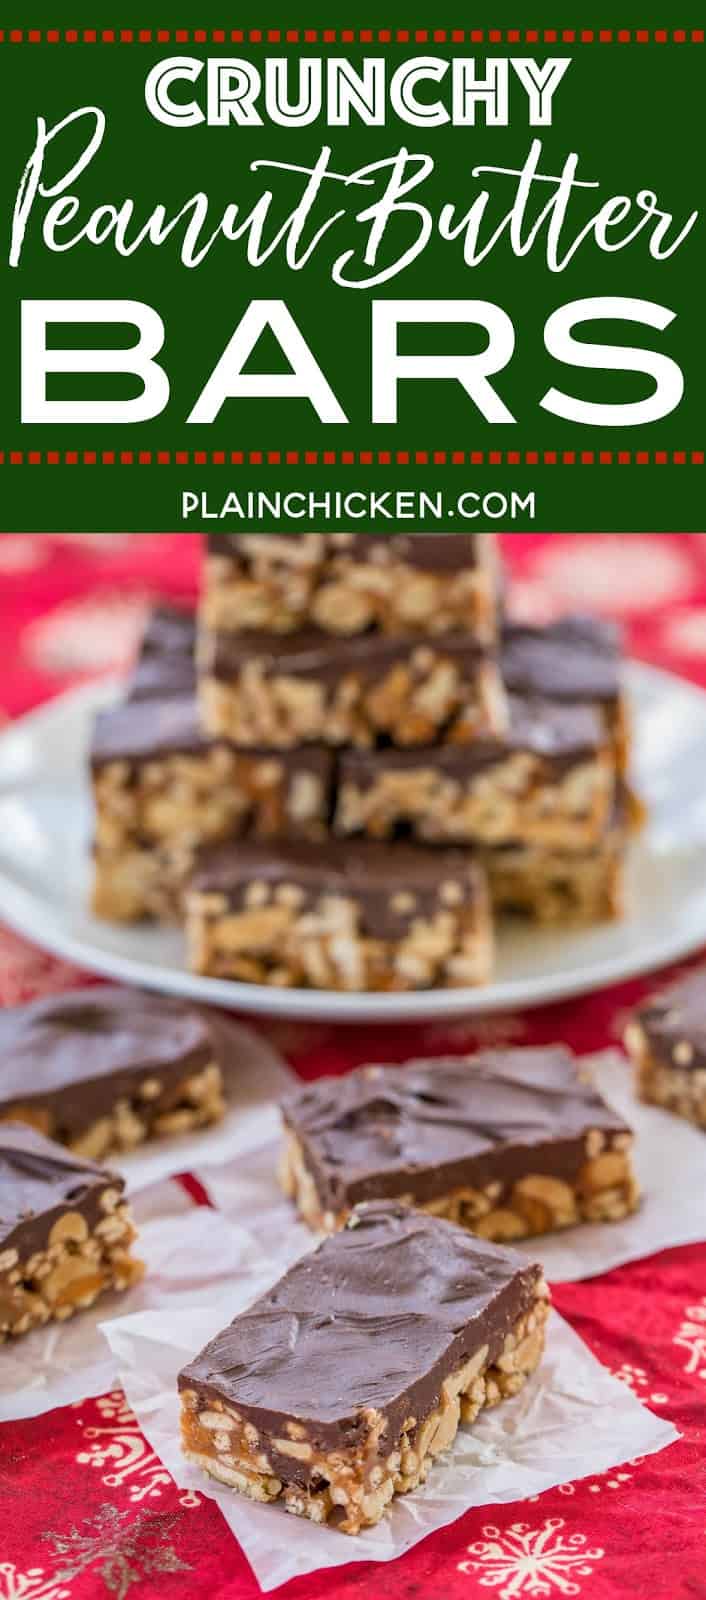 Crunchy Peanut Butter Bars recipe - NO-BAKE treat!!! Chow mein noodles, peanuts, butterfingers, peanut butter, corn syrup, sugar,  and chocolate. These things fly off the plate! Great for parties, cookie exchanges or a homemade gift!! #dessert #nobaketreats #peanutbutter 